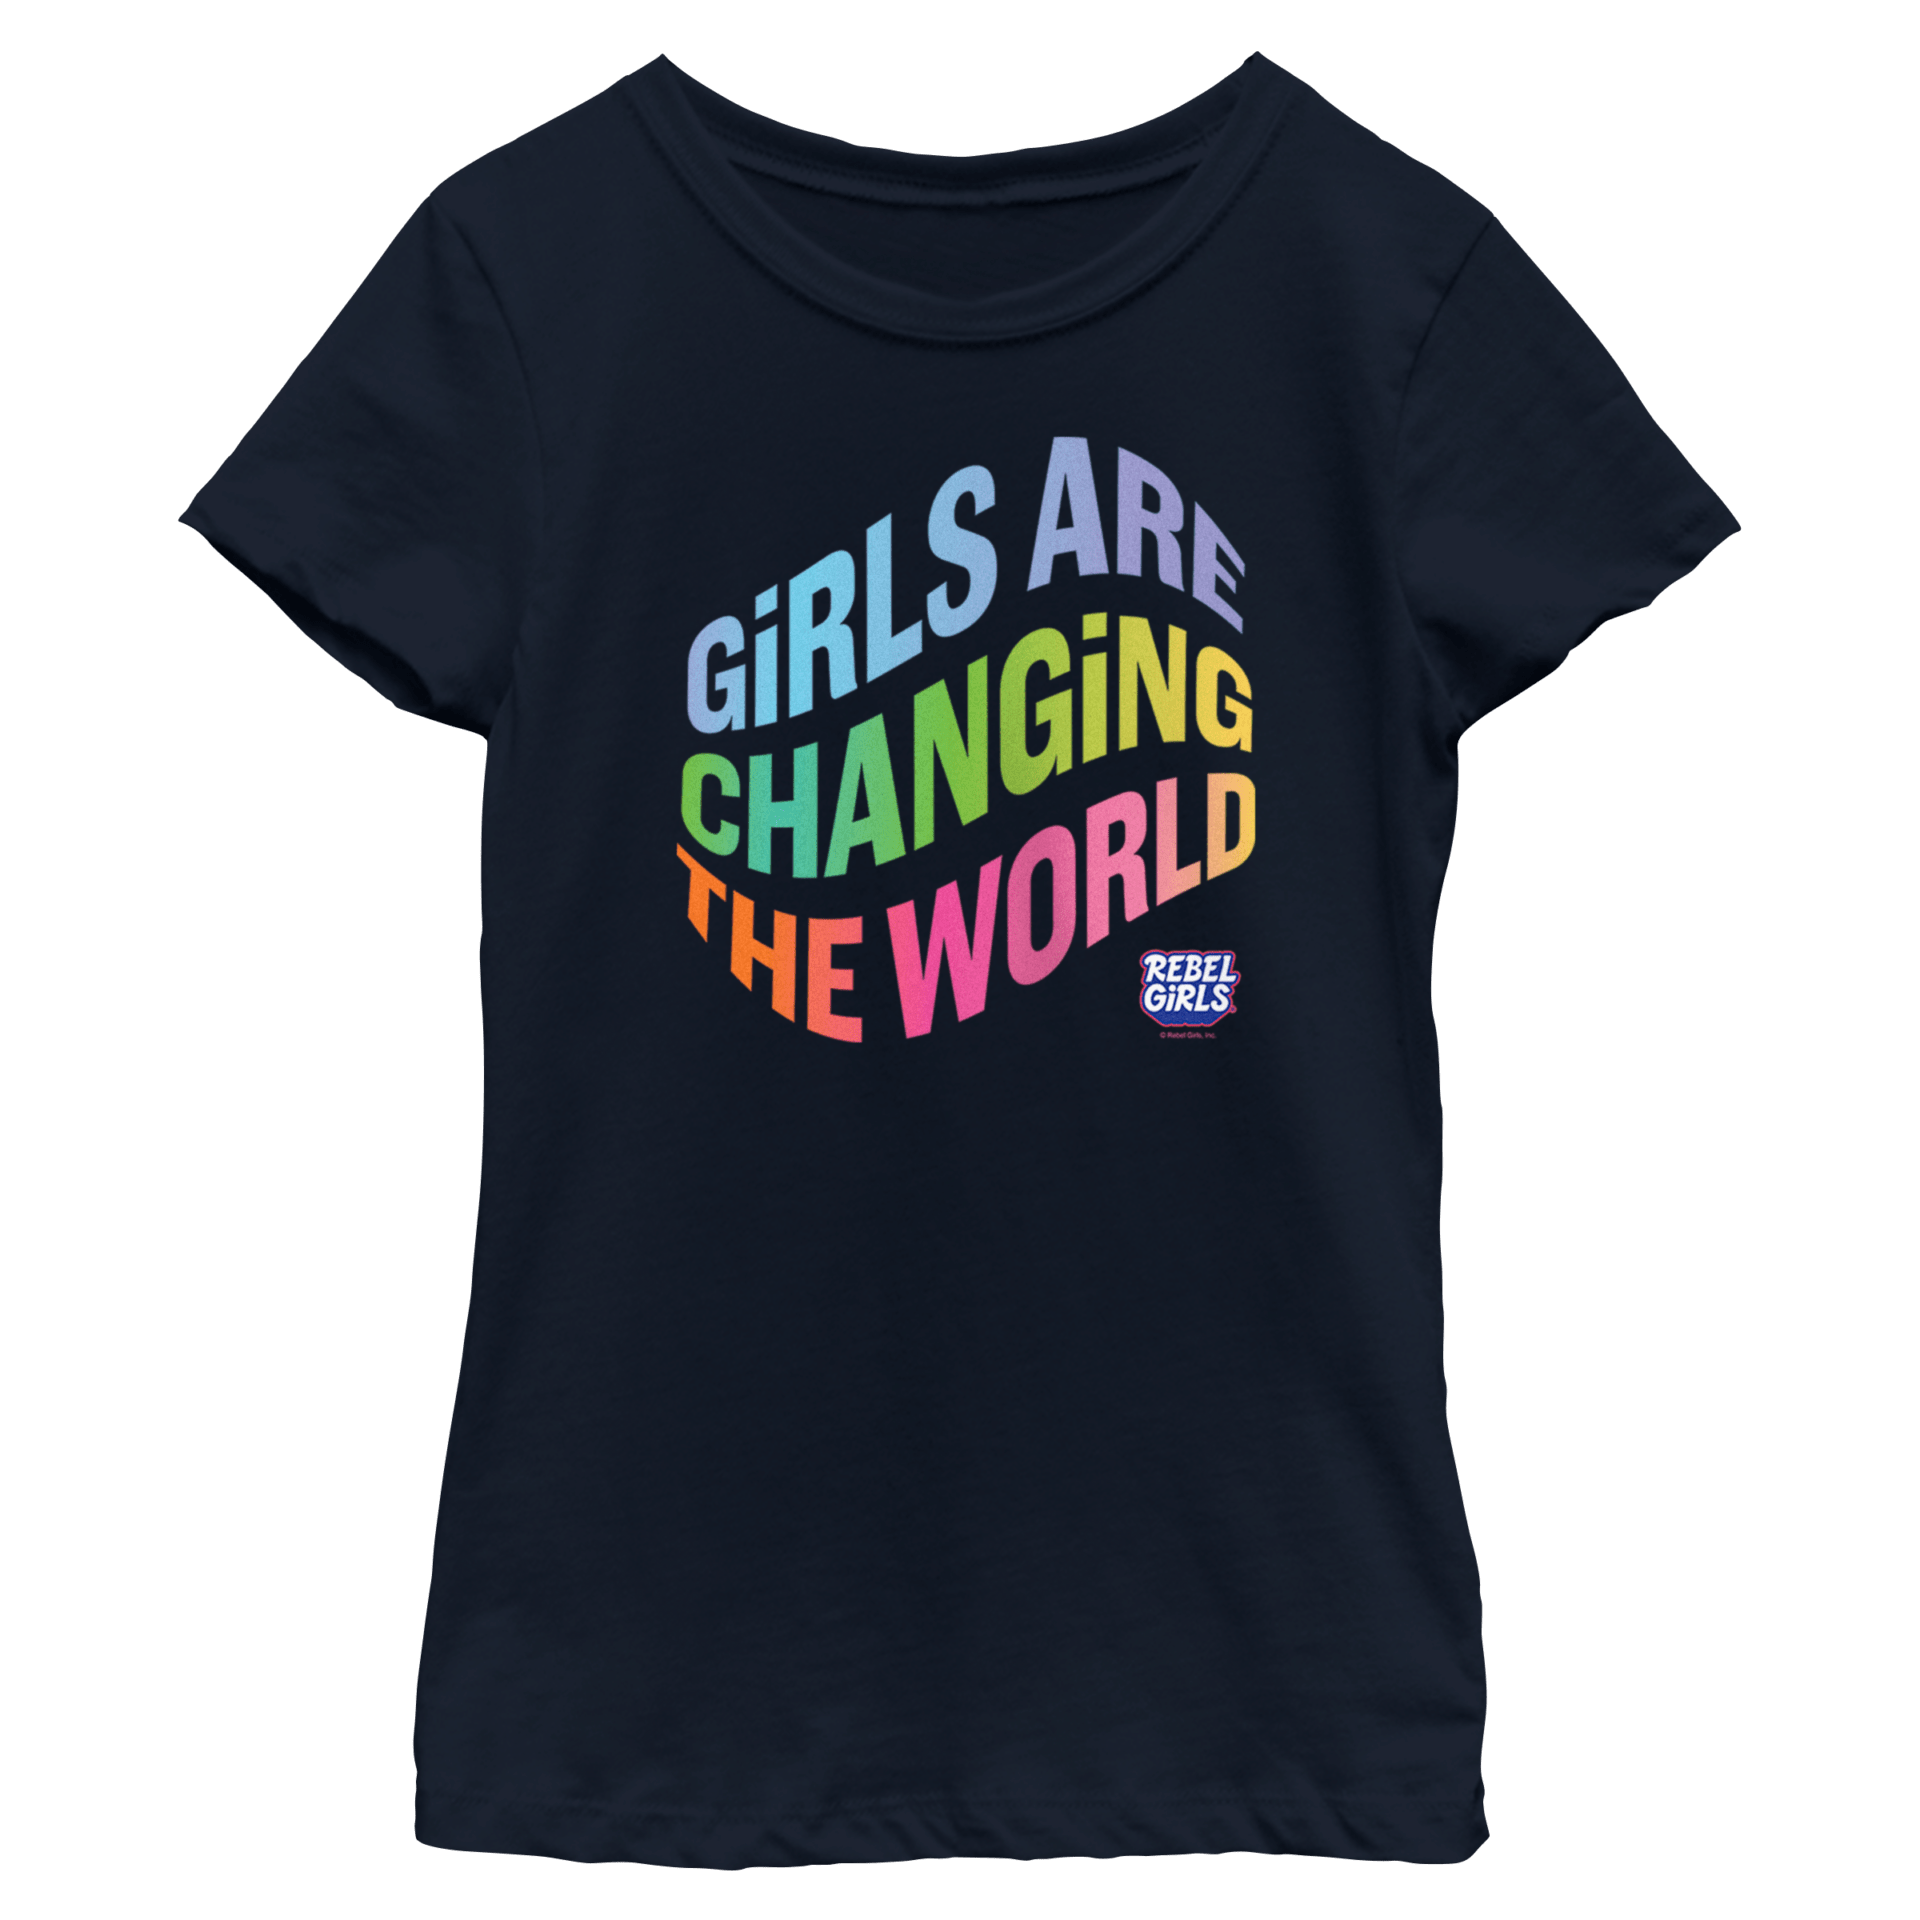 “Girls are Changing the World” Tees and Tops - thumbnail no 2